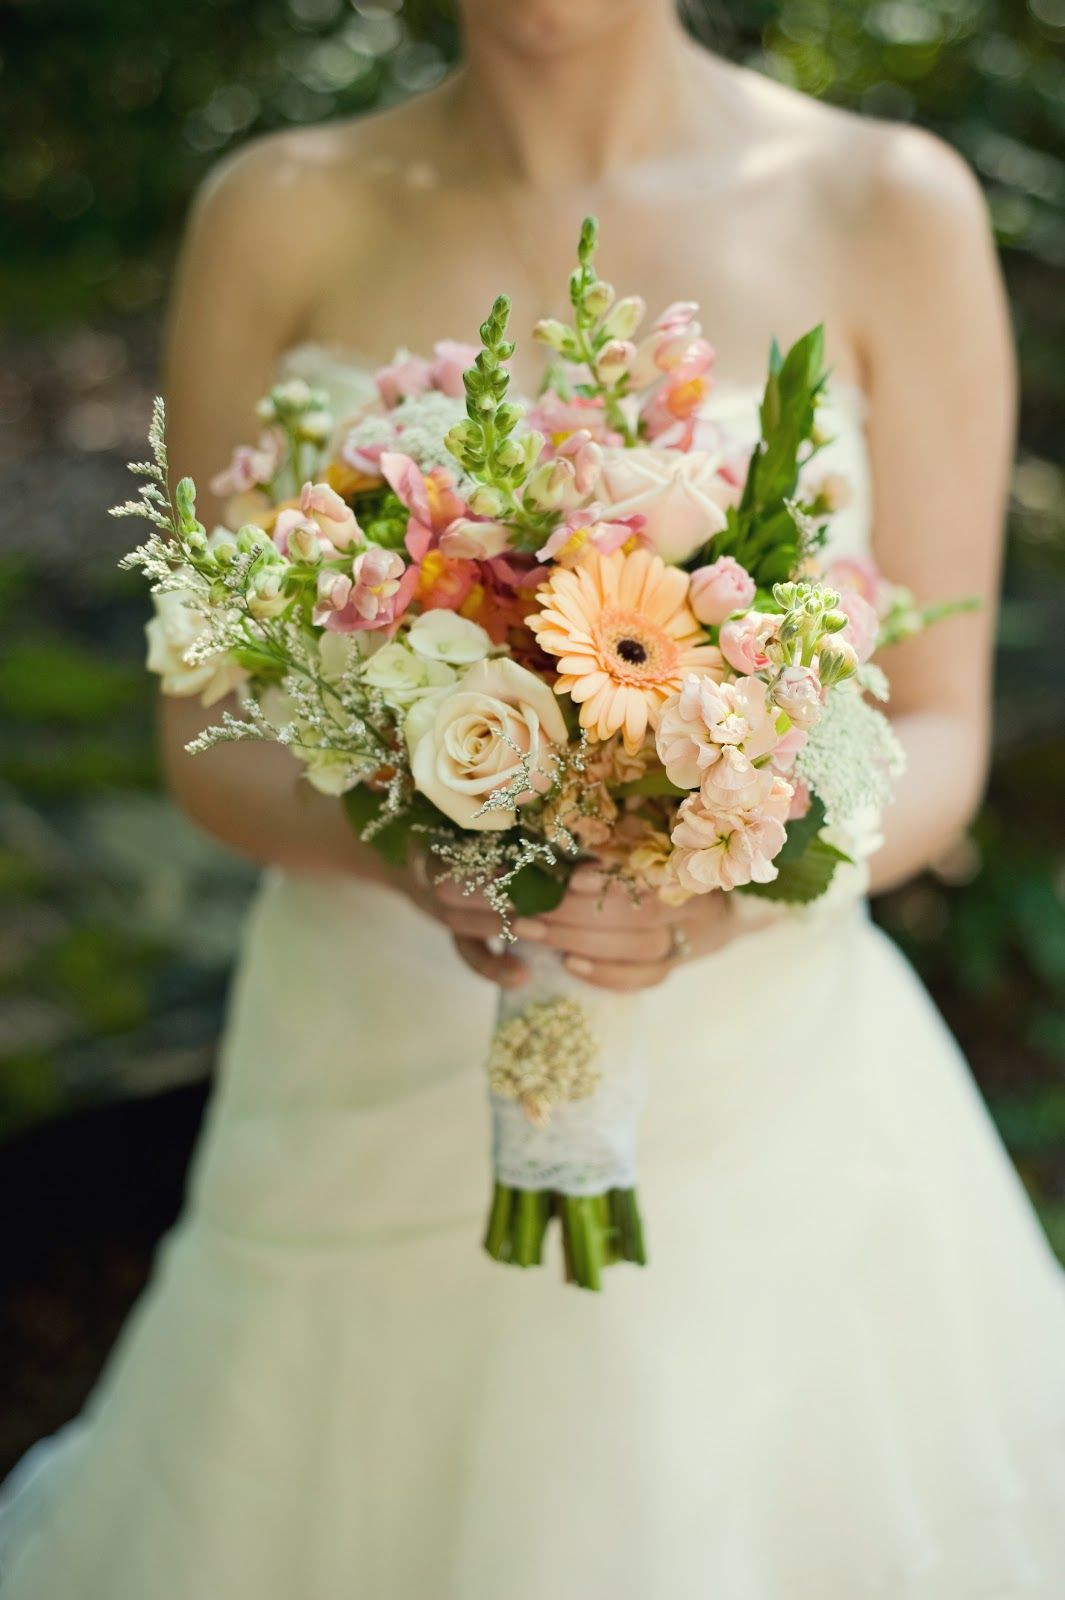 Summer Flowers For Wedding
 Gorgeous mix of brights and pastels summer wedding